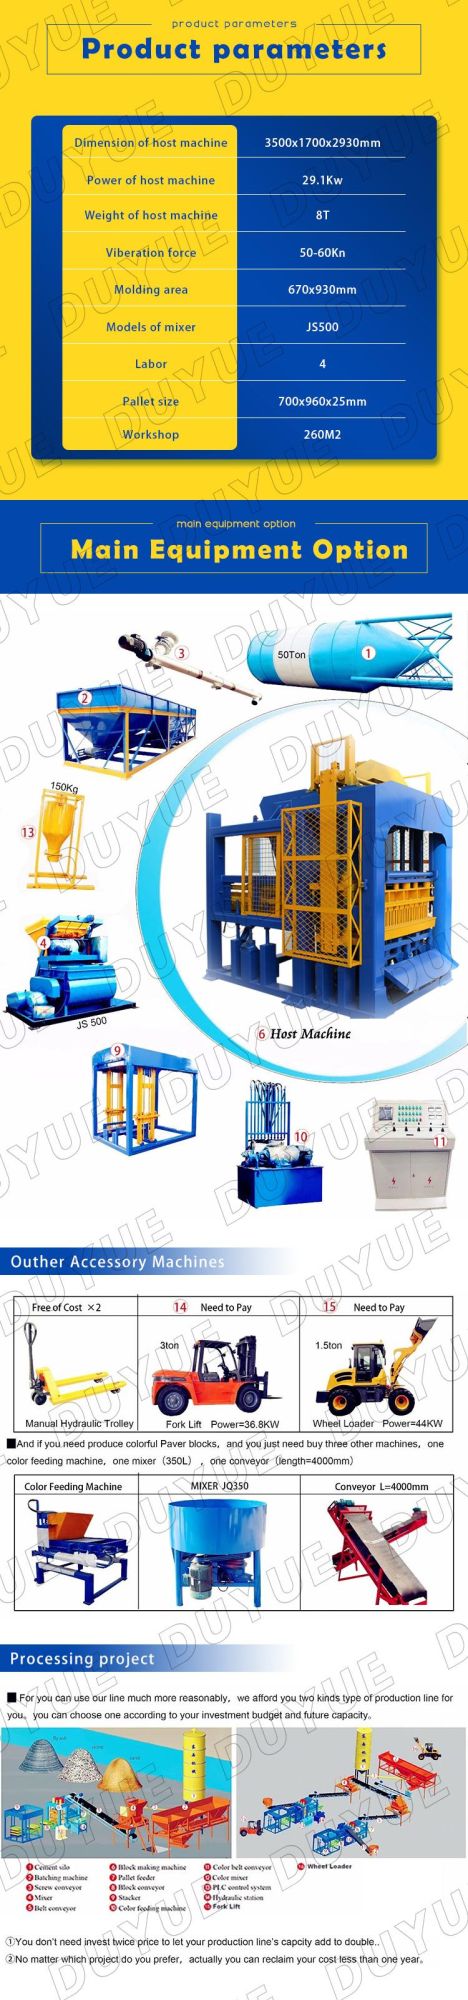 Qt6-15 China New Type Automatic Block Making Machine with Good Manufacturing Performance